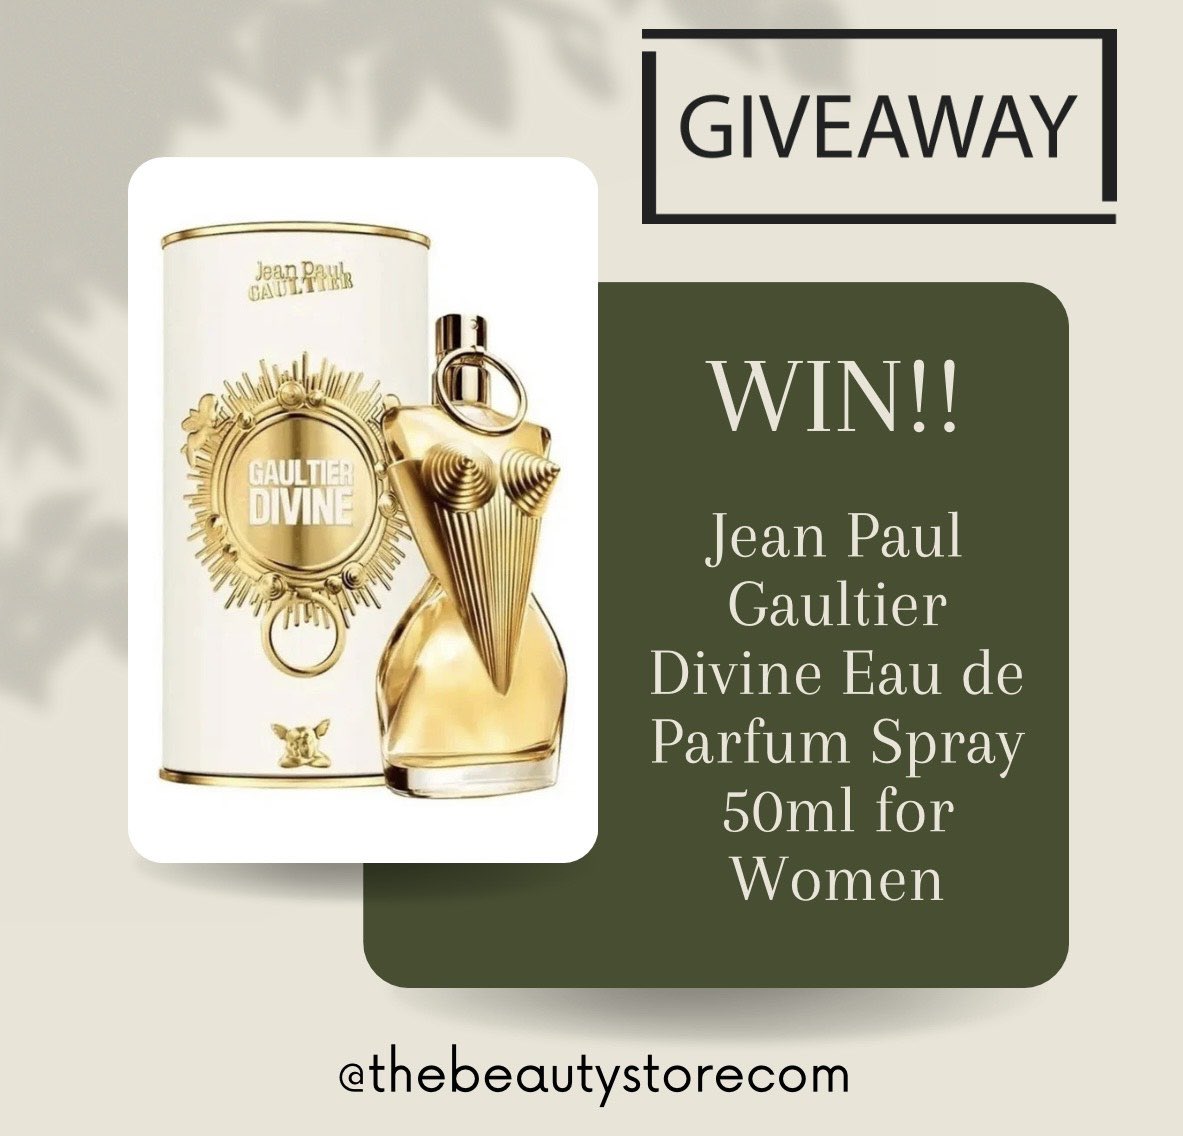 🎉Giveaway Time🎉 How would you like to win yourself a Jean Paul Gaultier Divine Eau de Parfum Spray 50ml for Women 1️⃣ Like & share this post  2️⃣ Tag your bestie 3️⃣ Make sure you are following @thebeautystorecom 🎉 Competition ends Thursday 16th May 6pm! Good Luck!